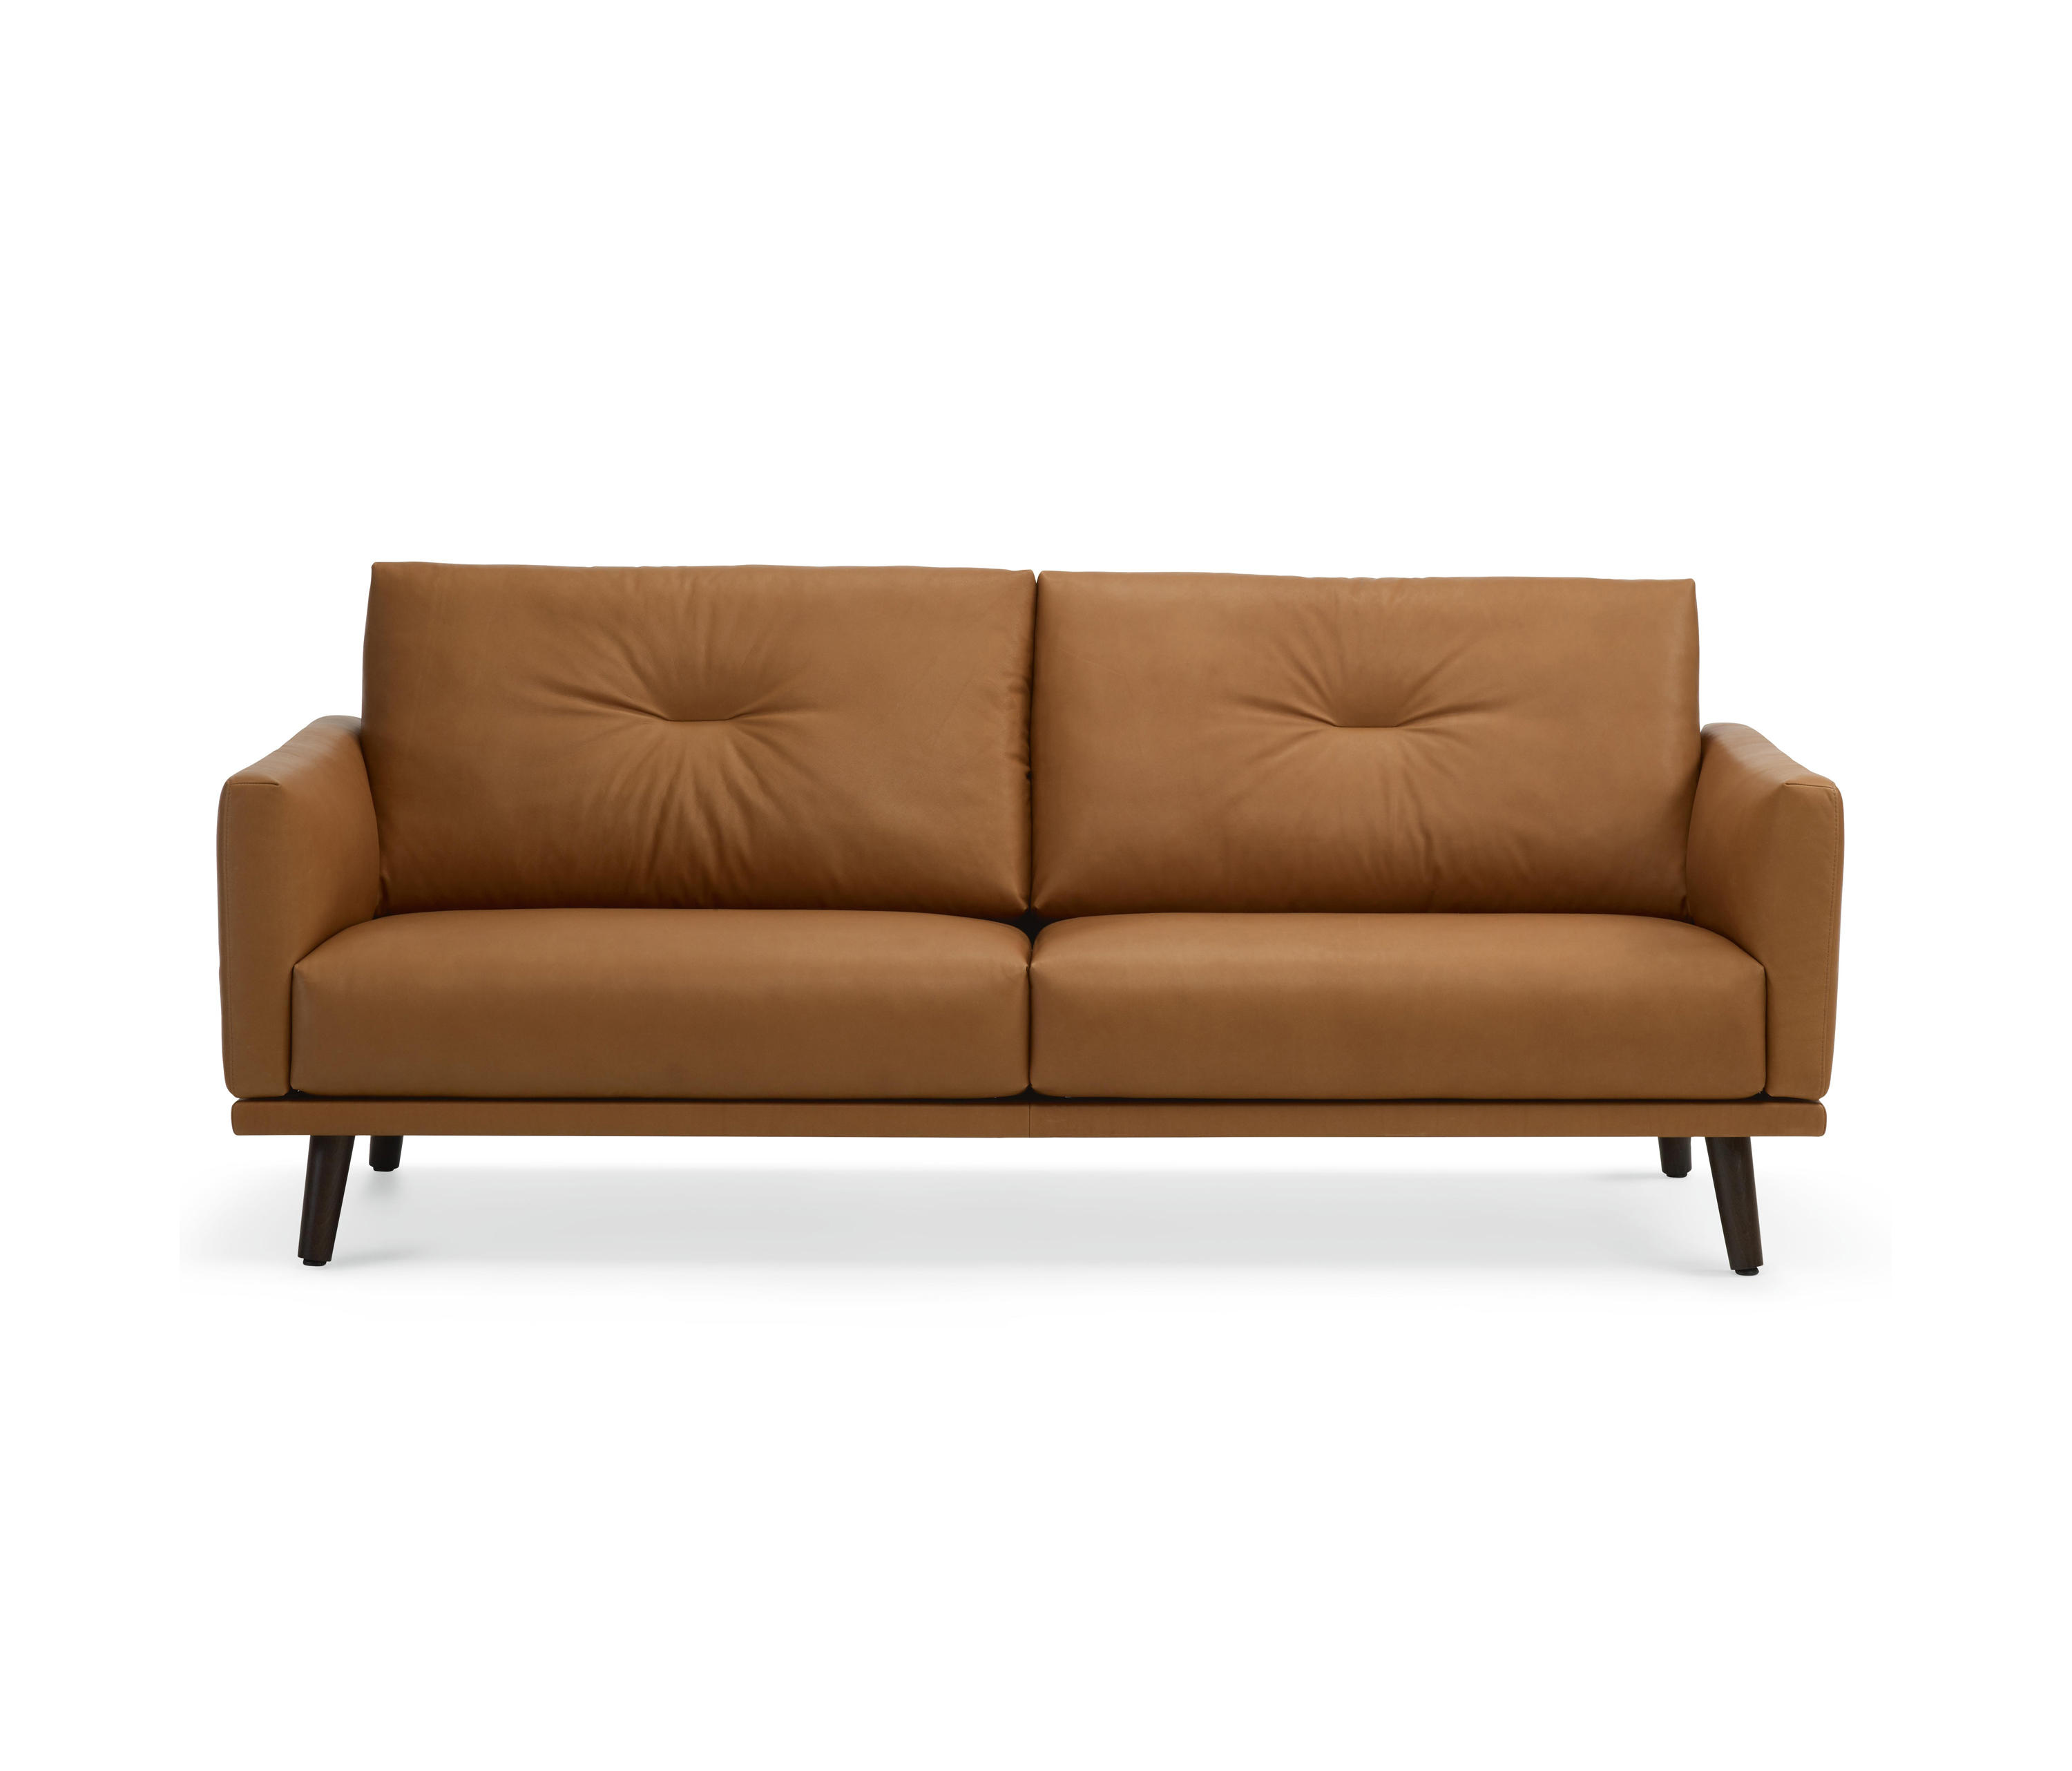 Mellow Sofa Collection by Intertime